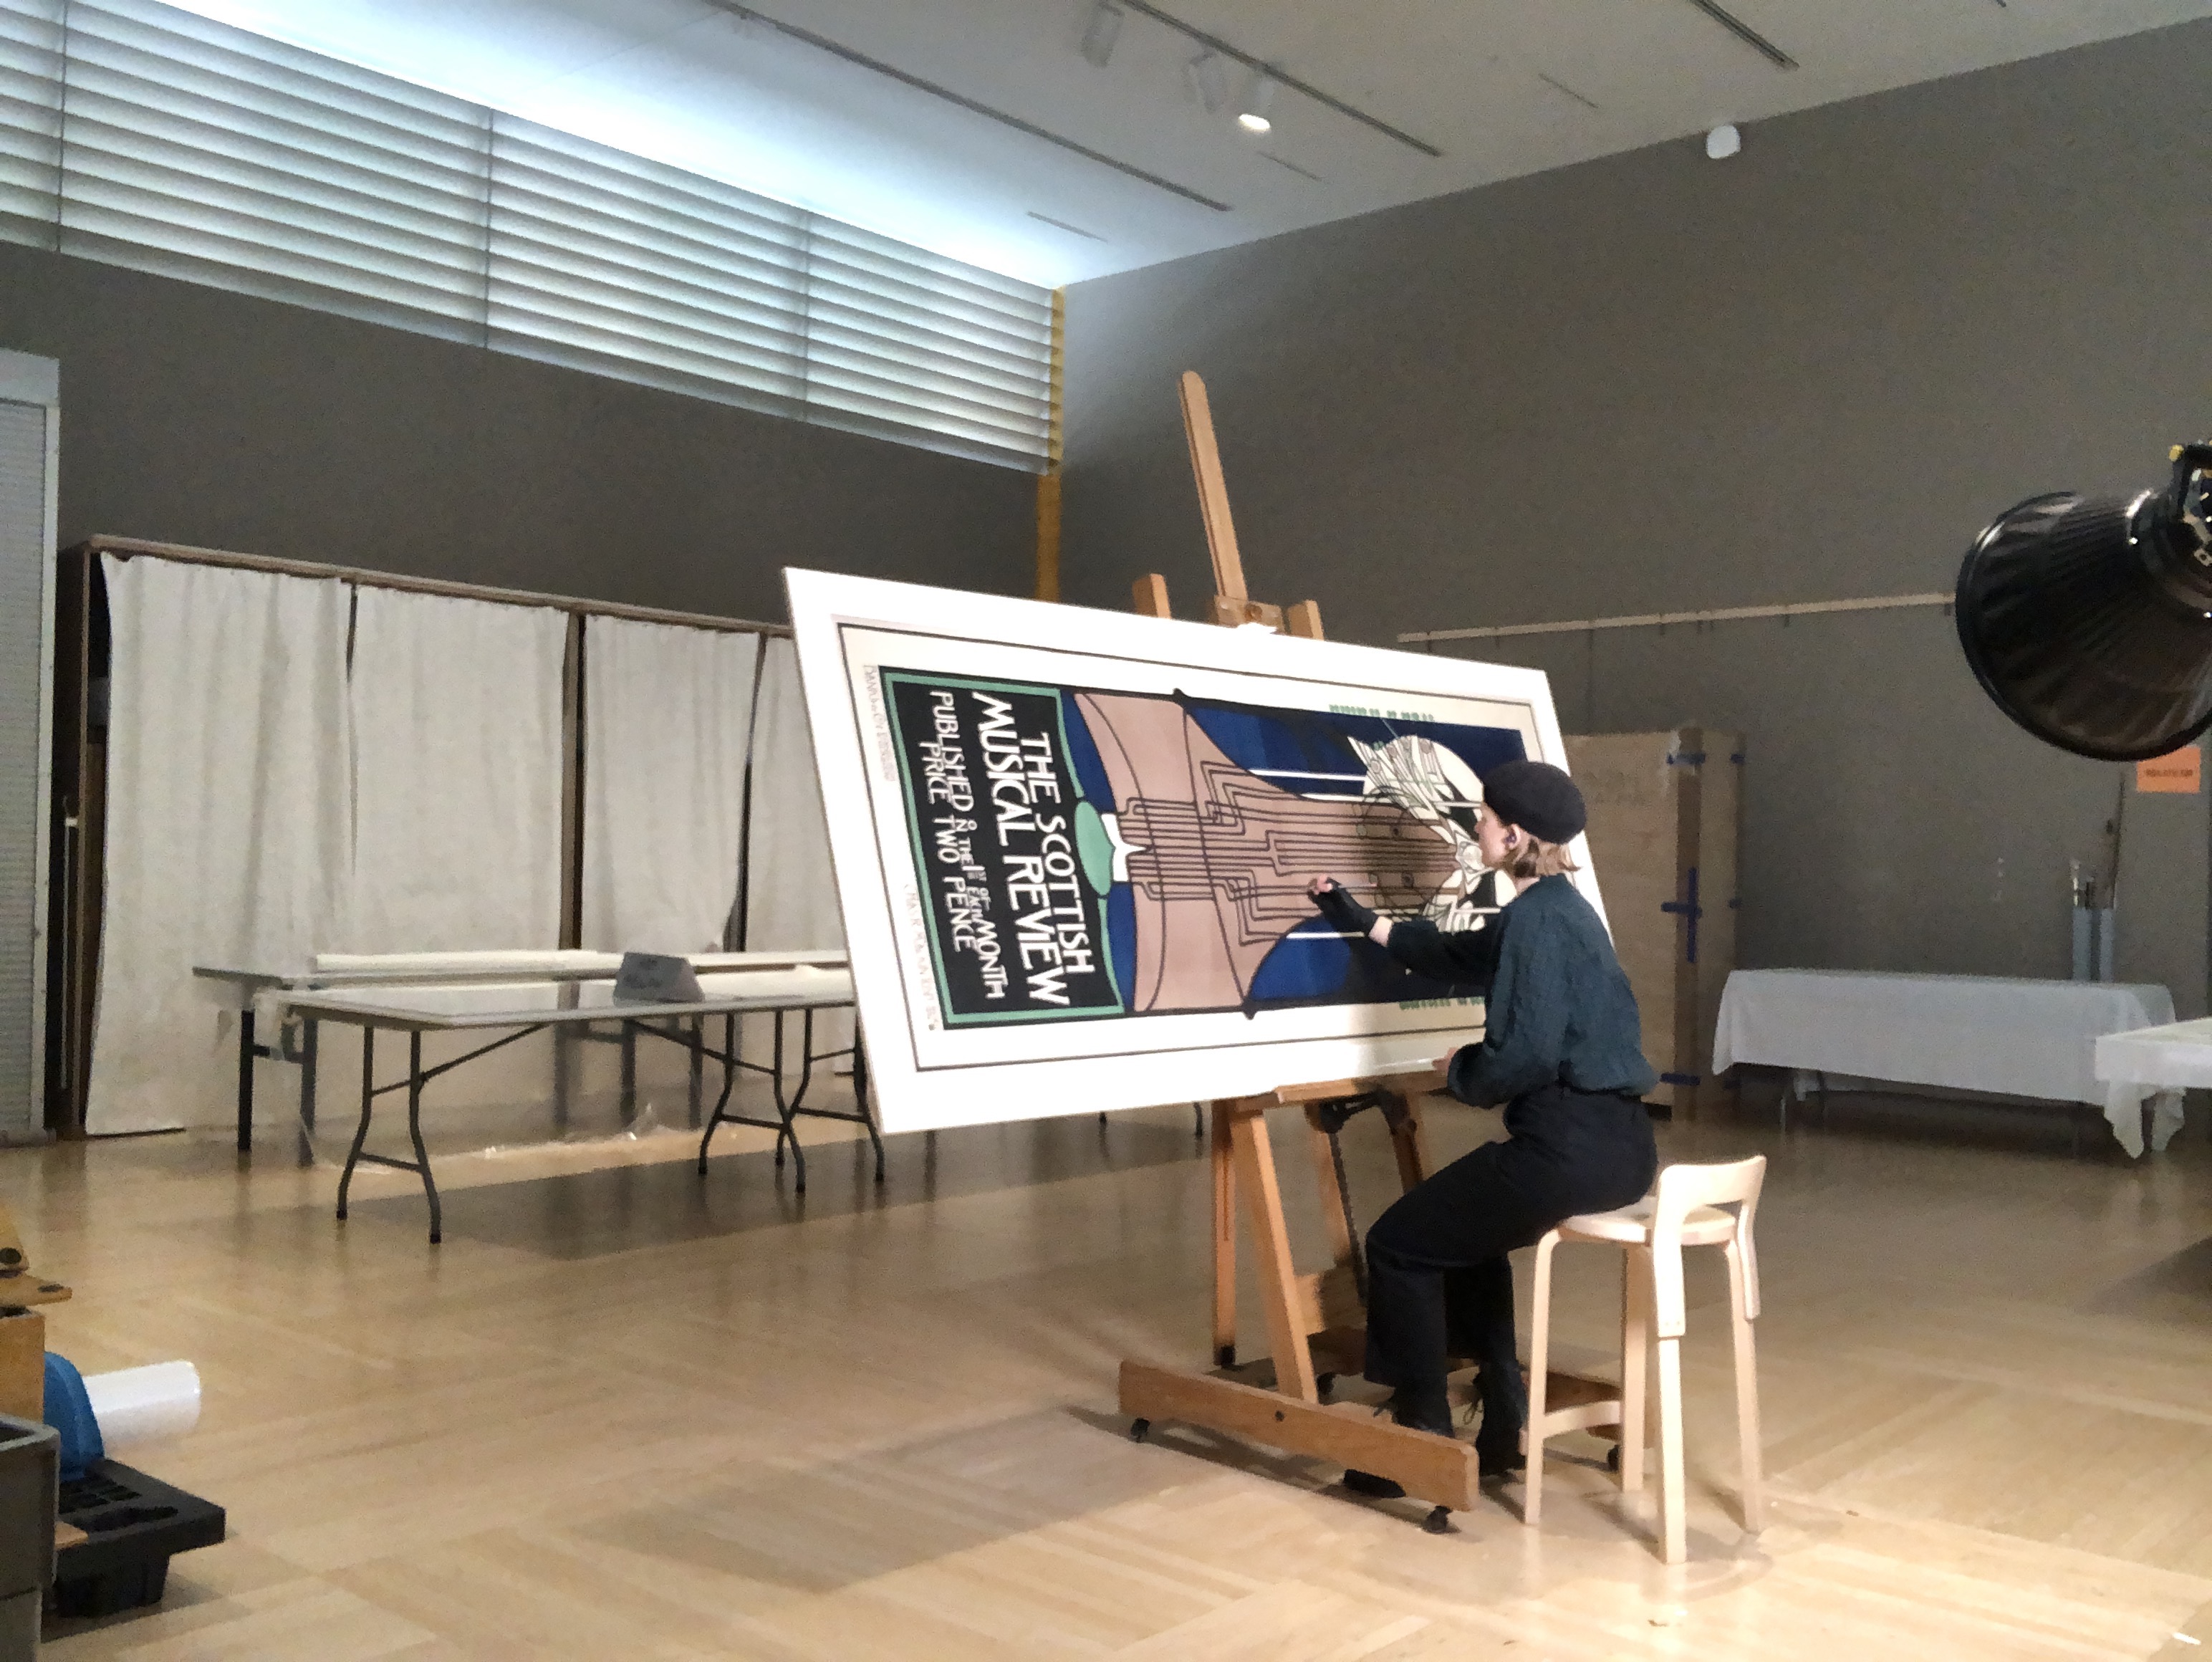 Inpainting losses after the object is mounted to its rigid support board, image courtesy of Madison Brockman